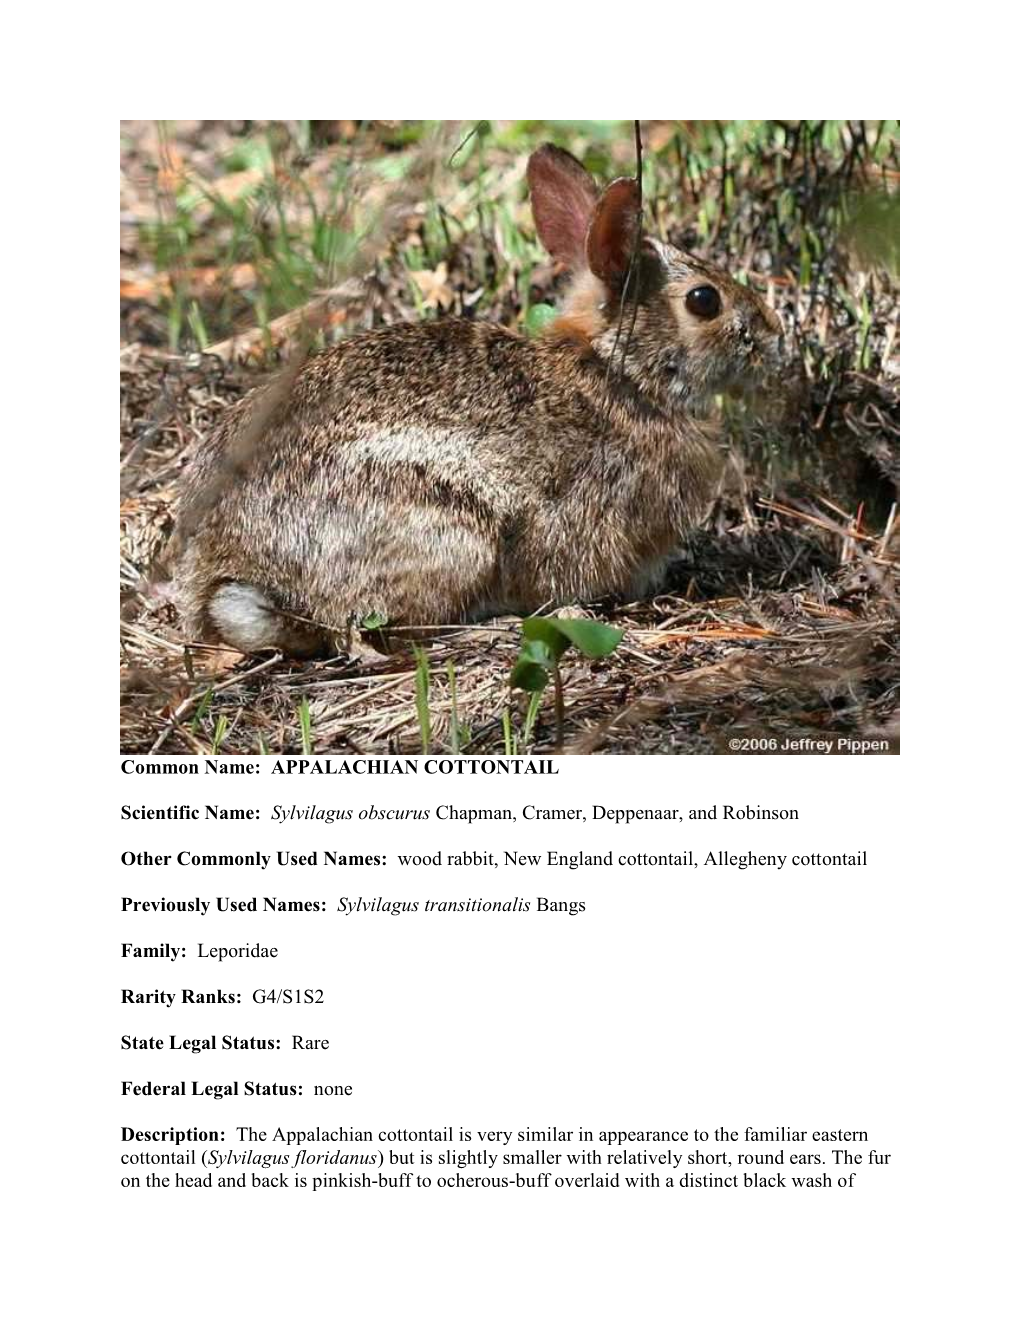 Common Name: APPALACHIAN COTTONTAIL Scientific Name: Sylvilagus Obscurus Chapman, Cramer, Deppenaar, and Robinson Other Commonl